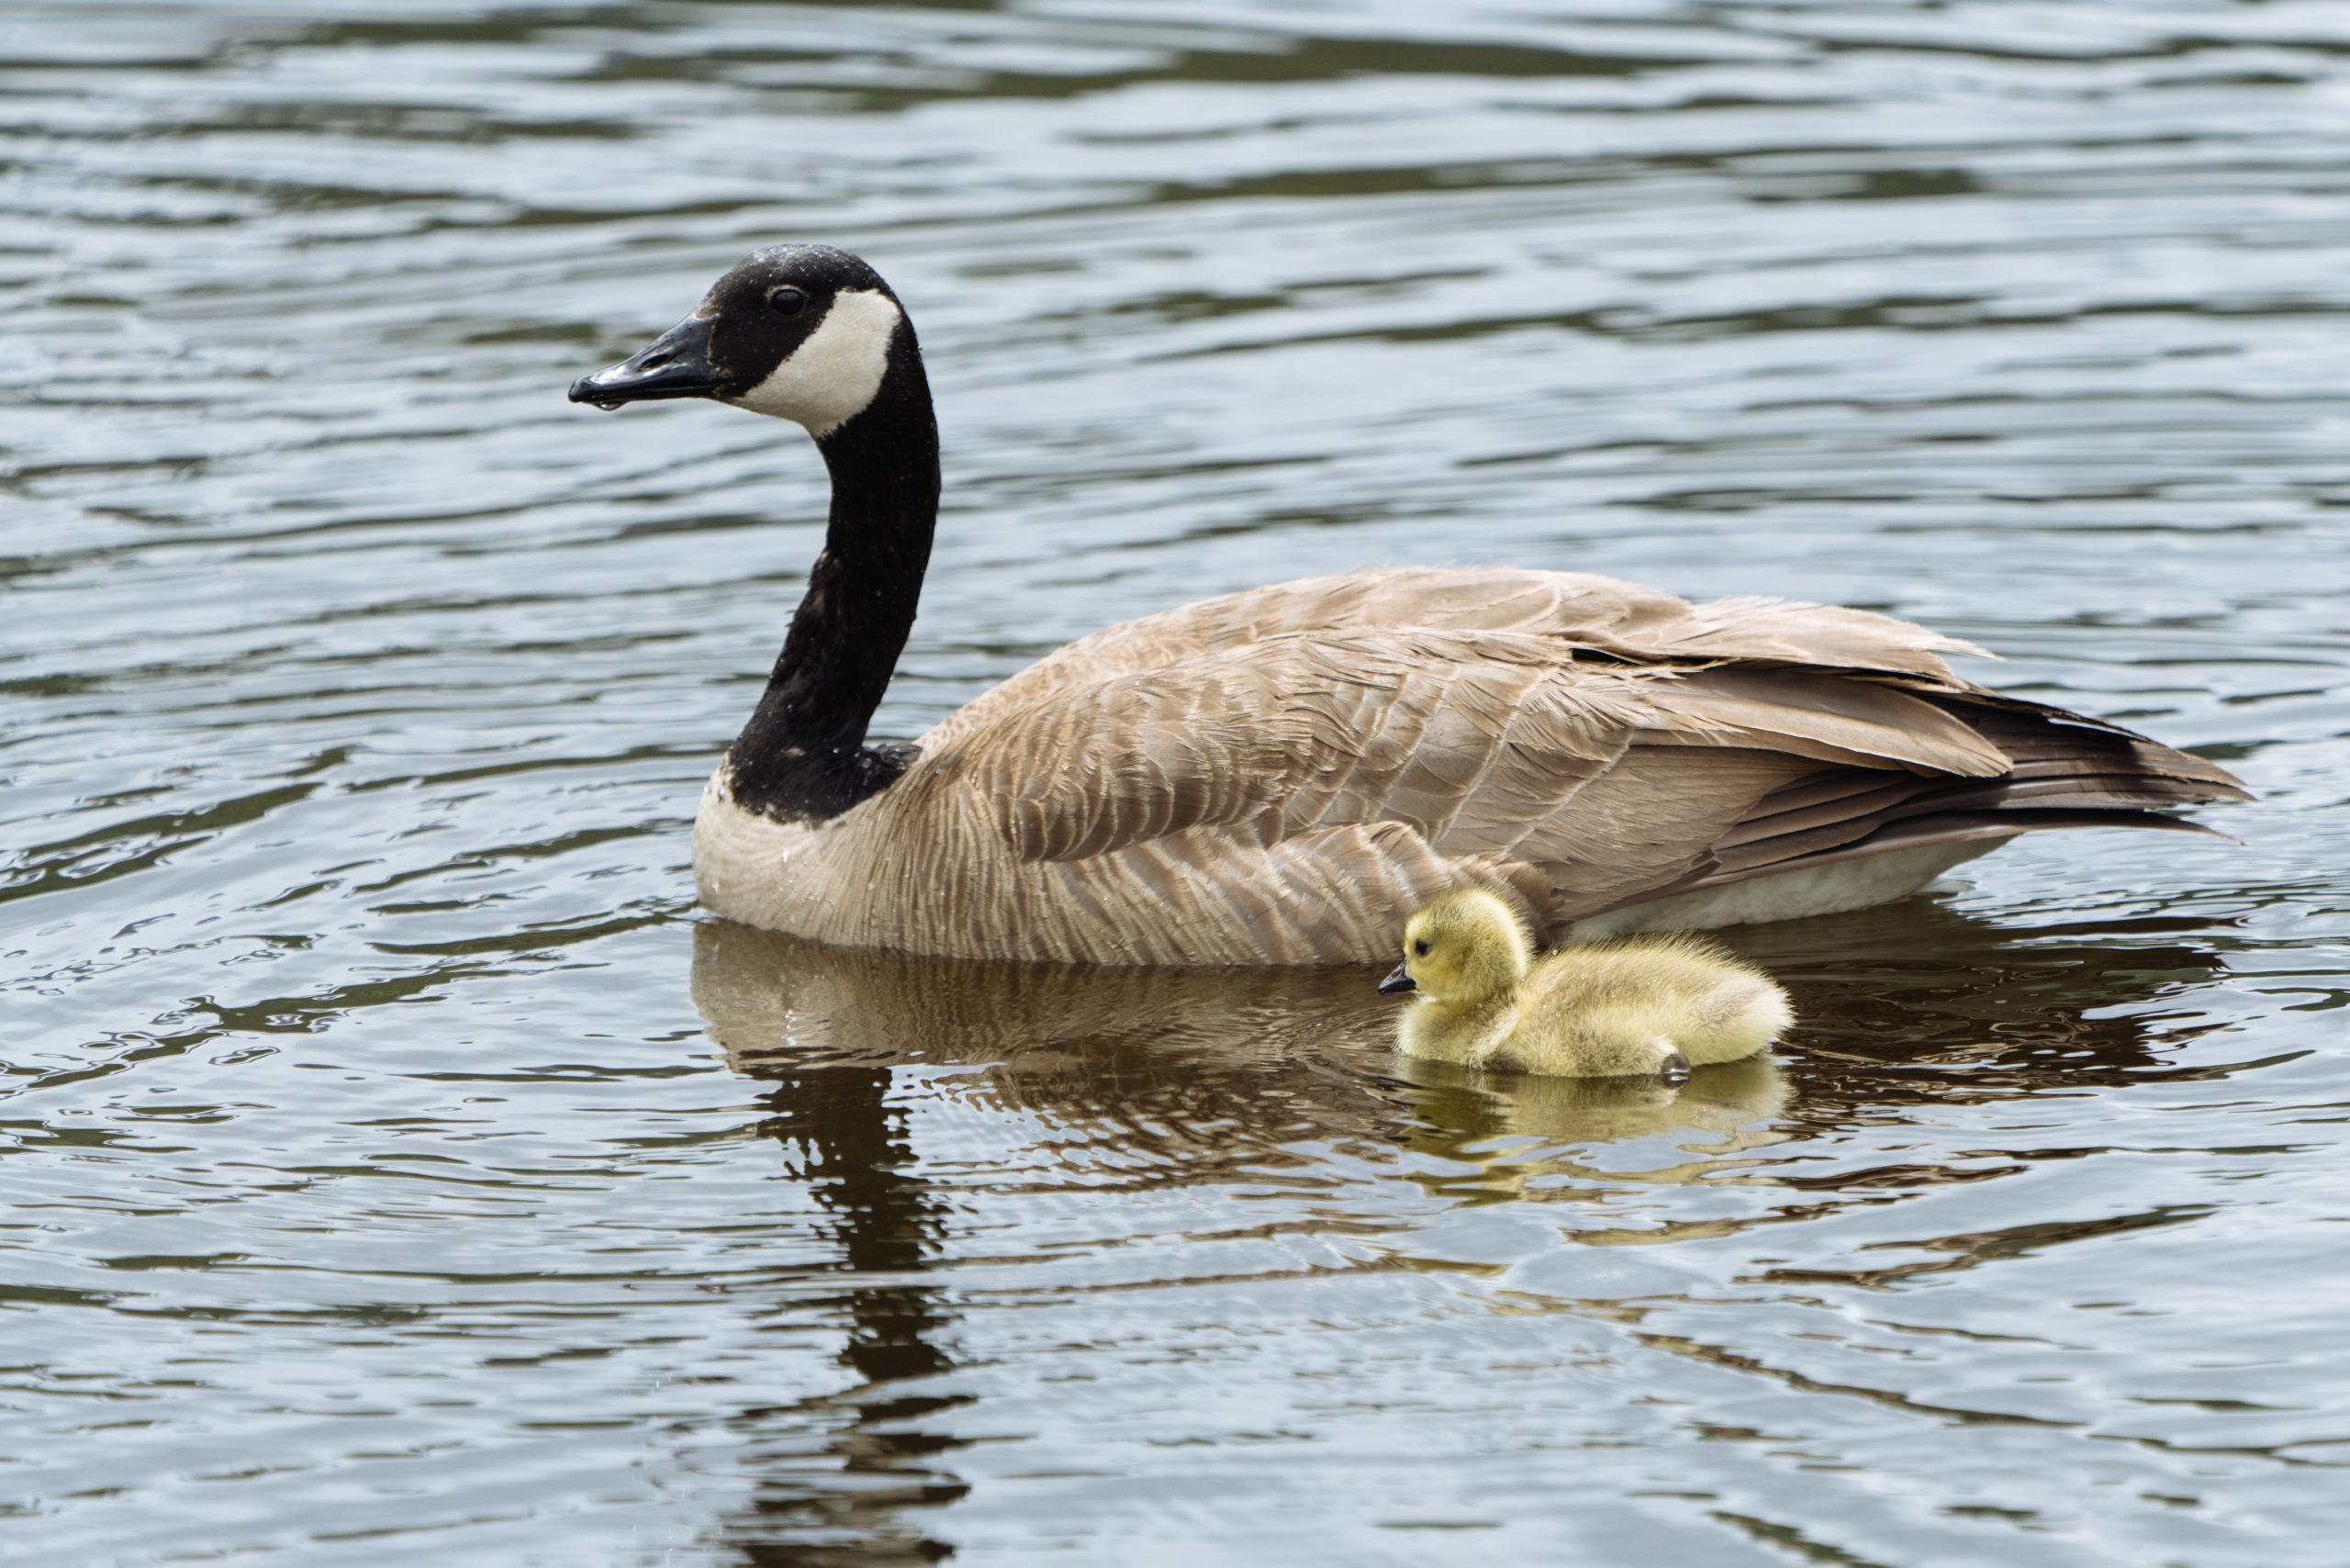 A Canada goose and young gosling swim together, side-by-side. Photo by Erick Todd from Pexels.